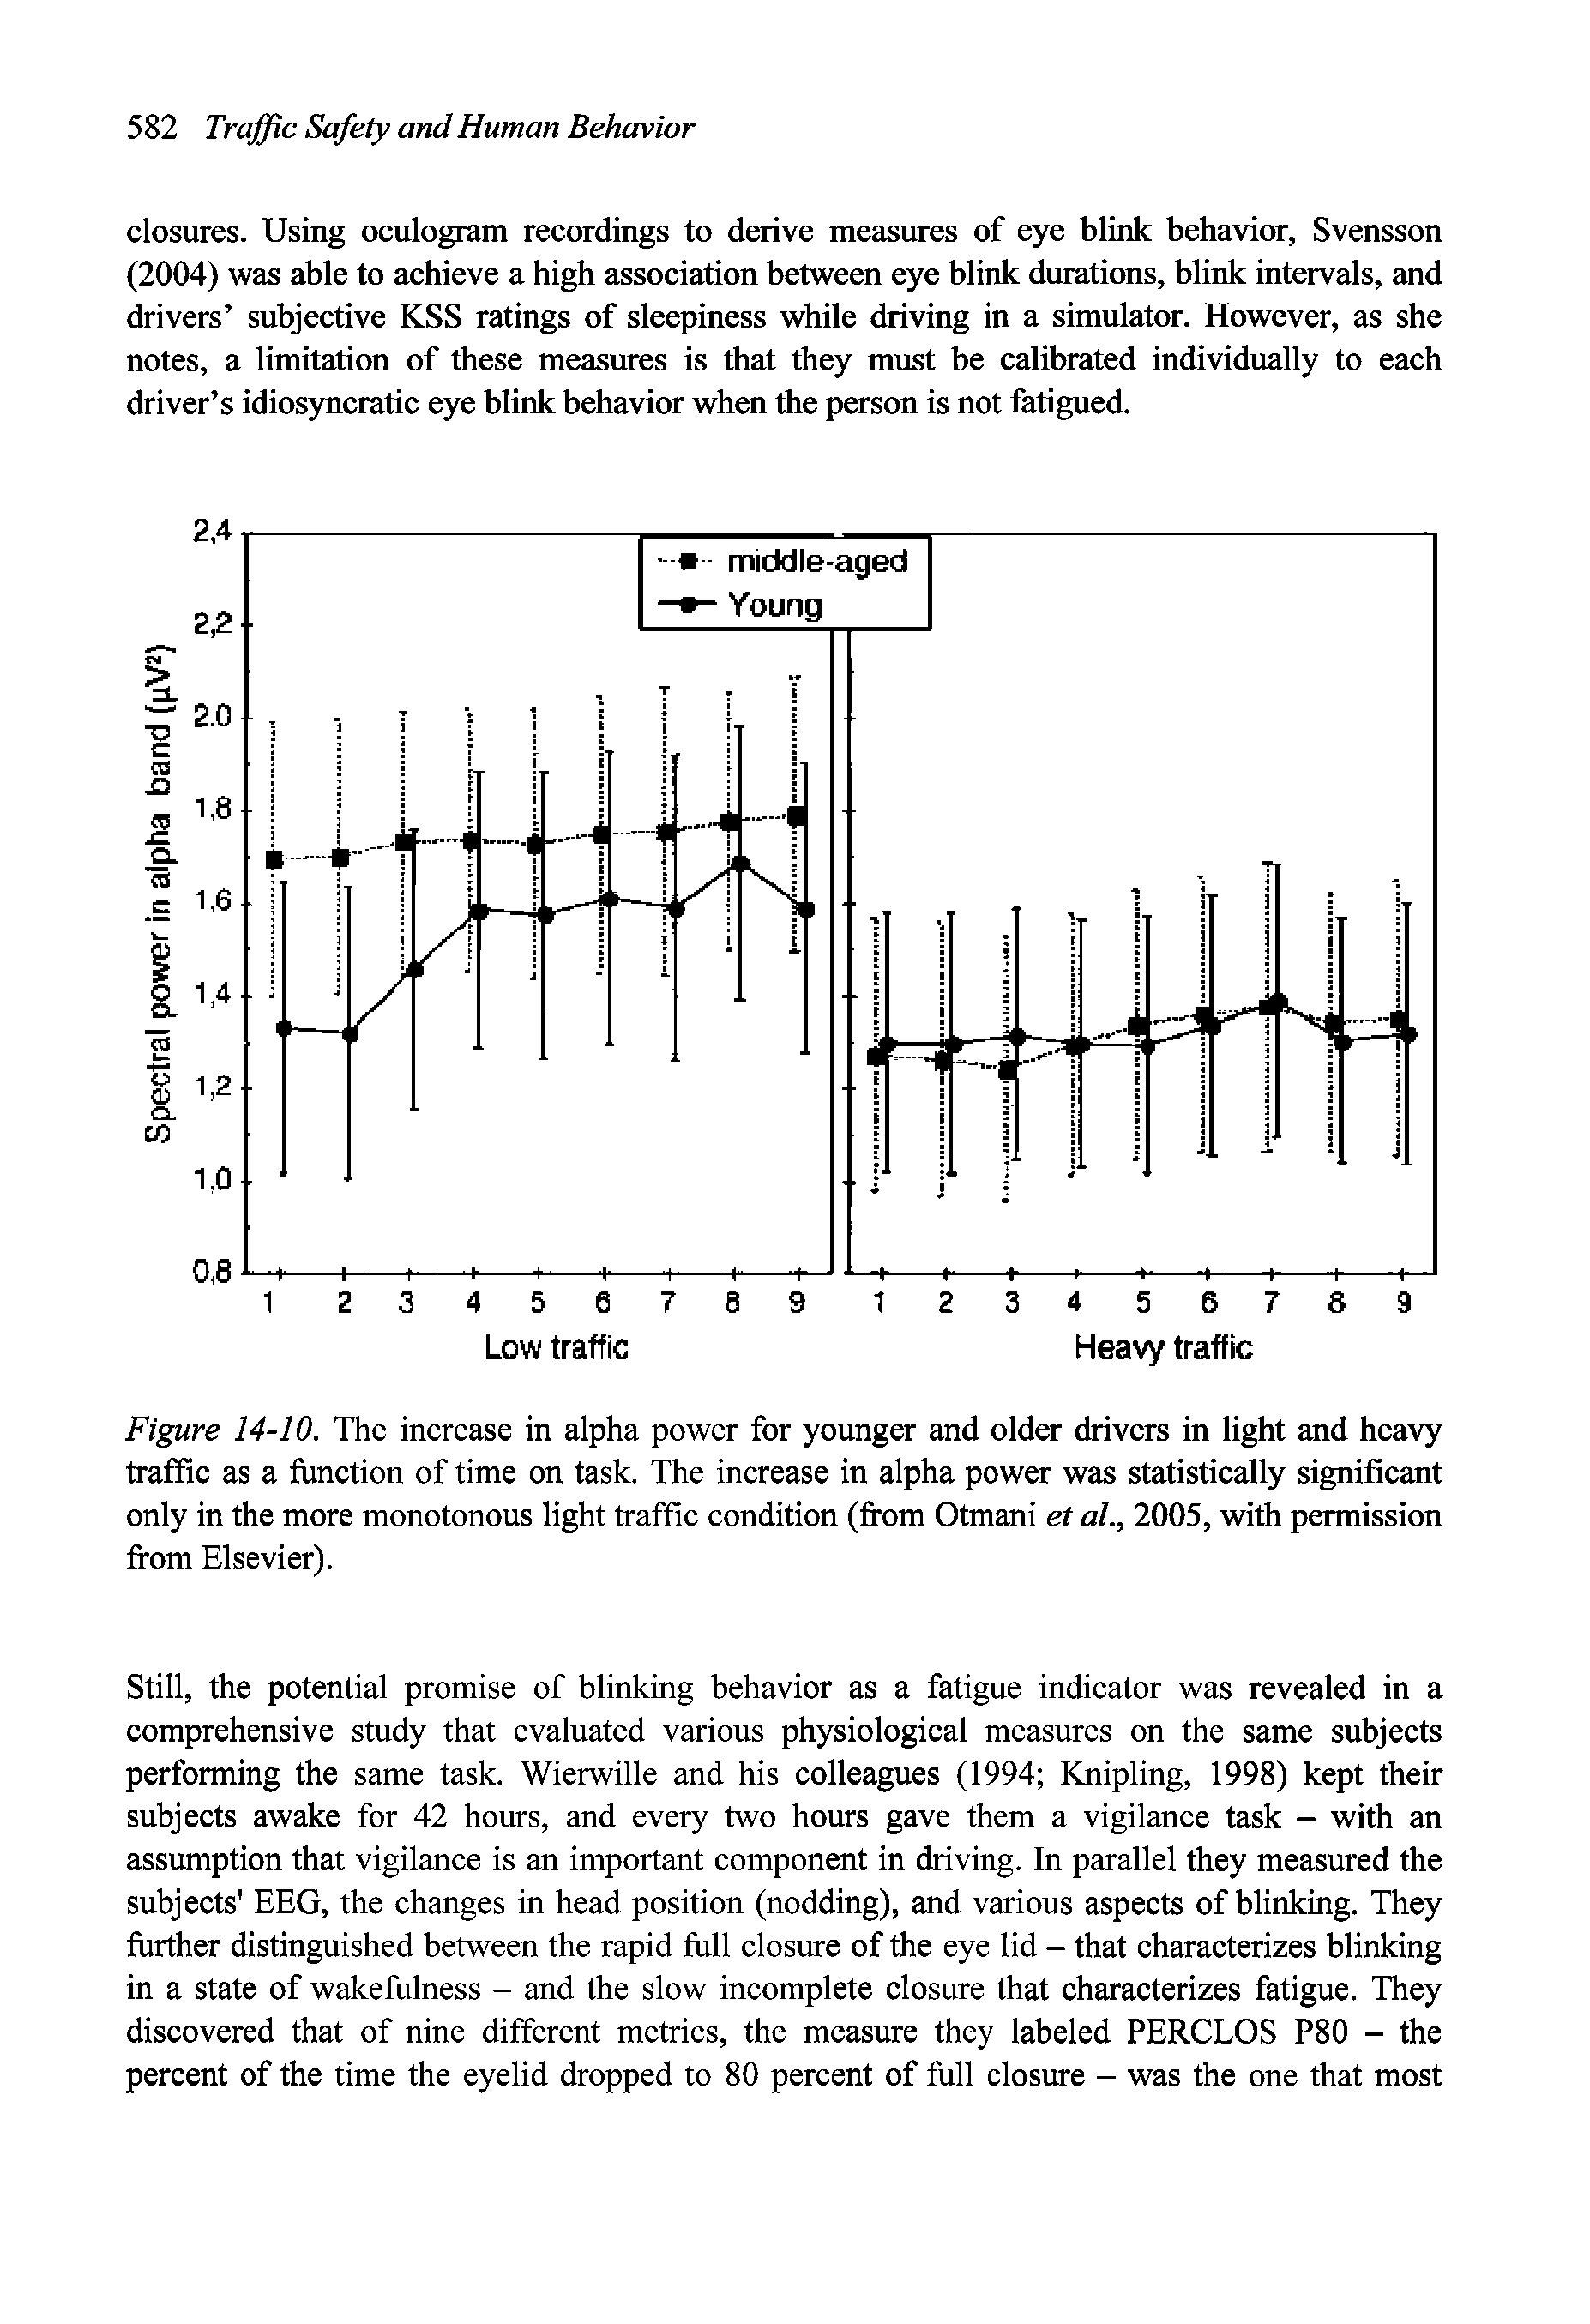 Figure 14-10. The increase in alpha power for younger and older drivers in light and heavy traffic as a function of time on task. The increase in alpha power was statistically significant only in the more monotonous light traffic condition (from Otmani et aL 2005, with permission from Elsevier).